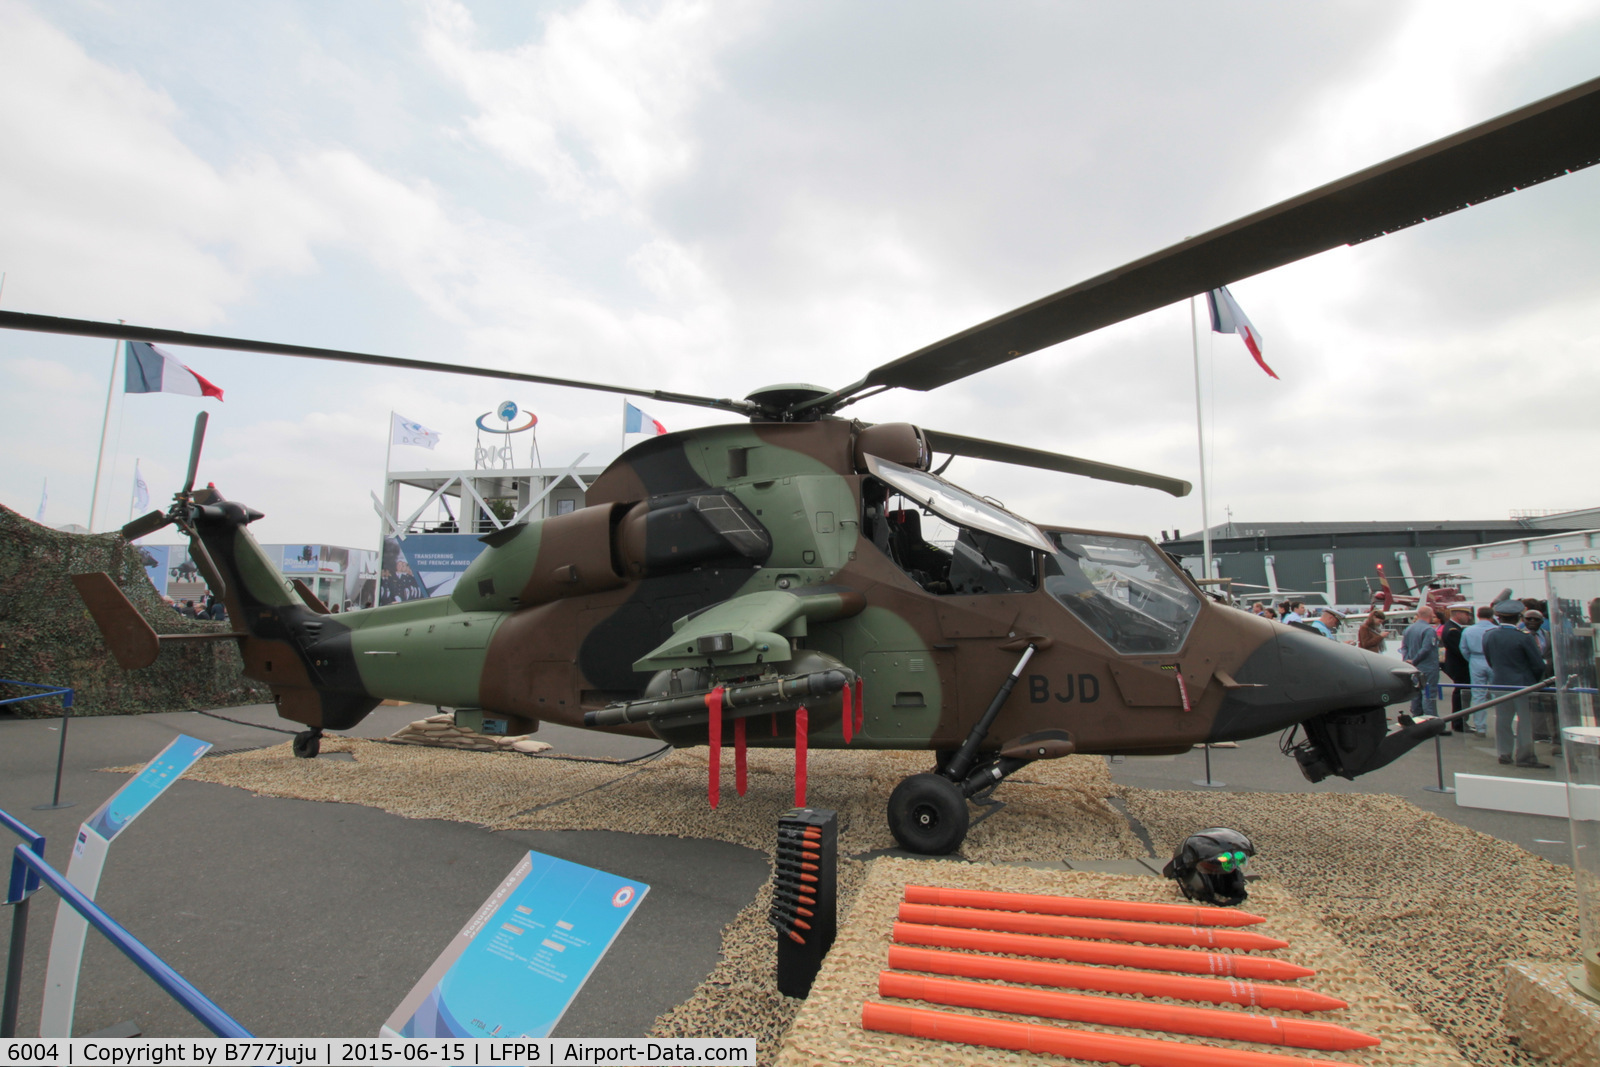 6004, 2013 Eurocopter EC-665 Tigre HAD C/N 6004, at Le Bourget for SIAE 2015